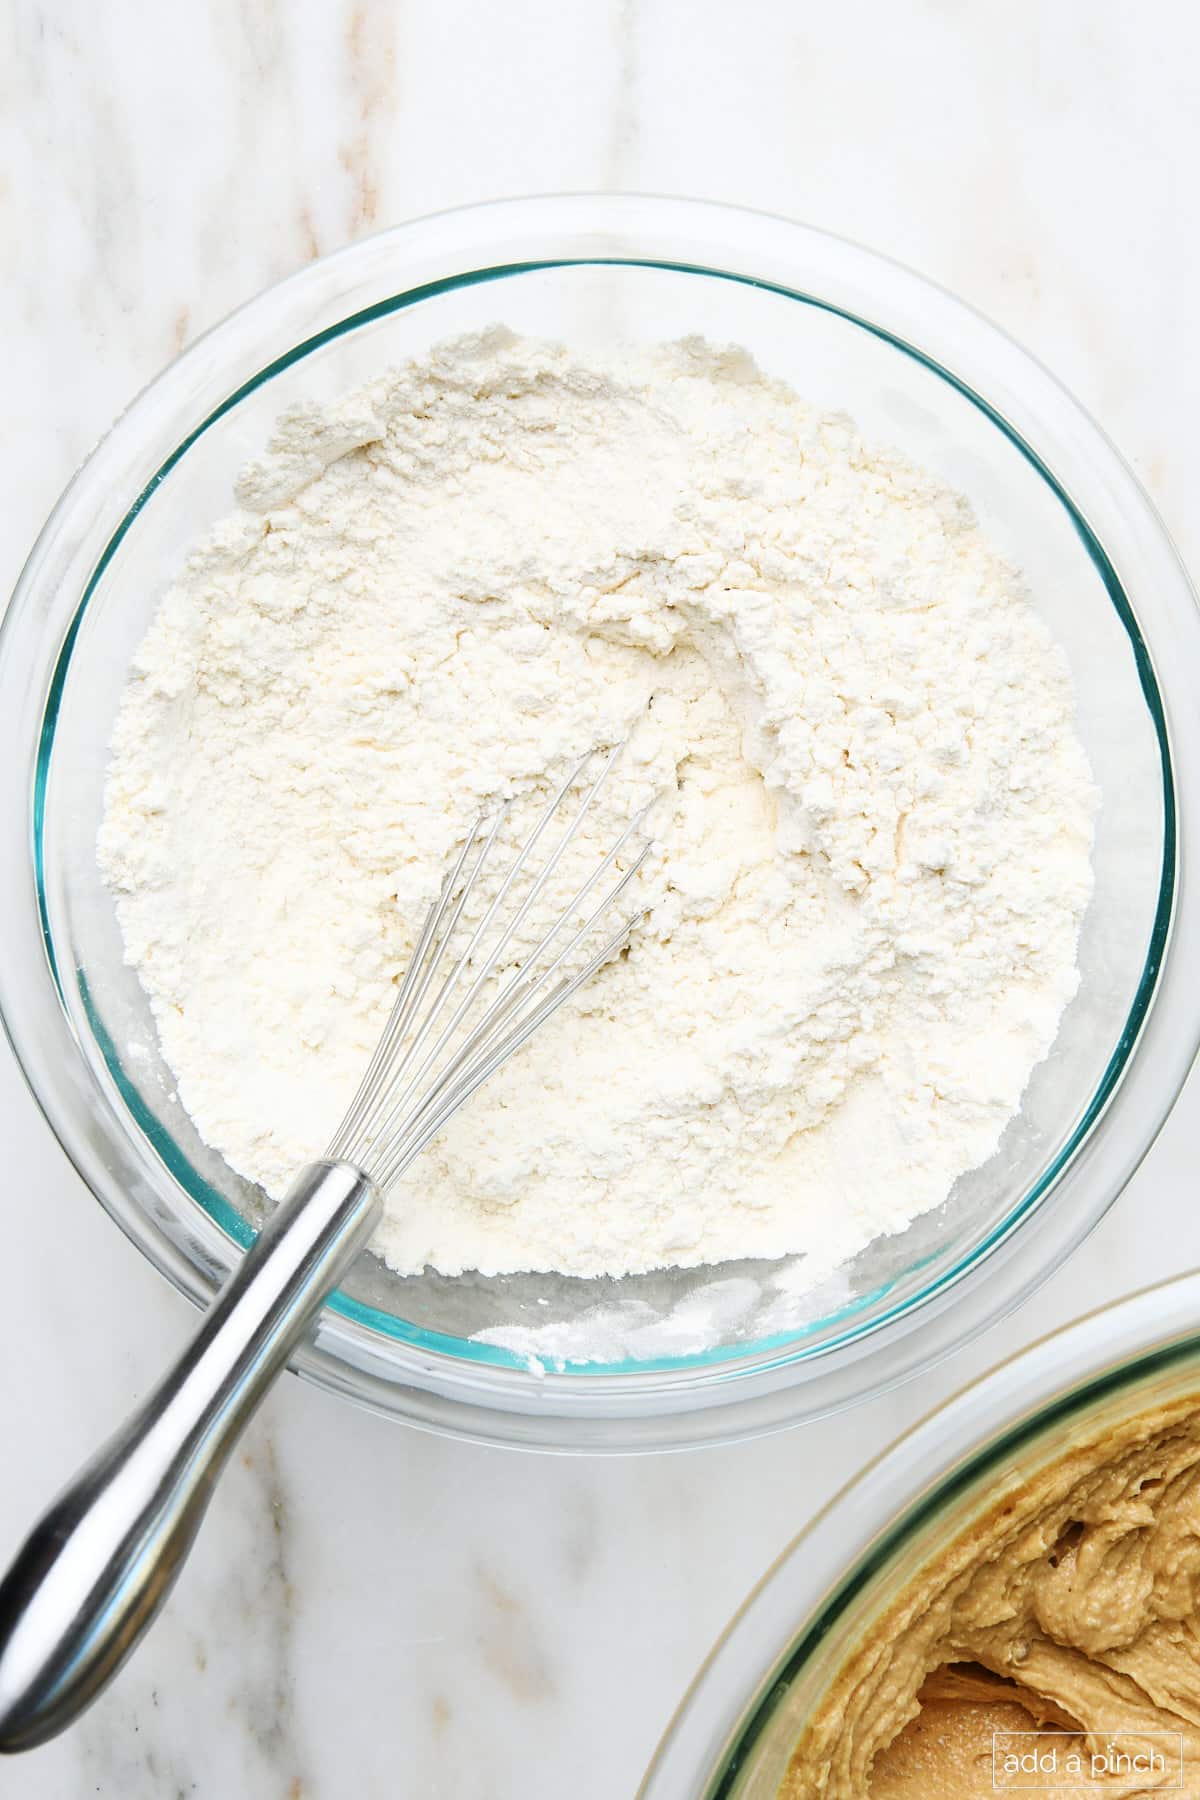 Combined flour and baking powder in a mixing bowl.